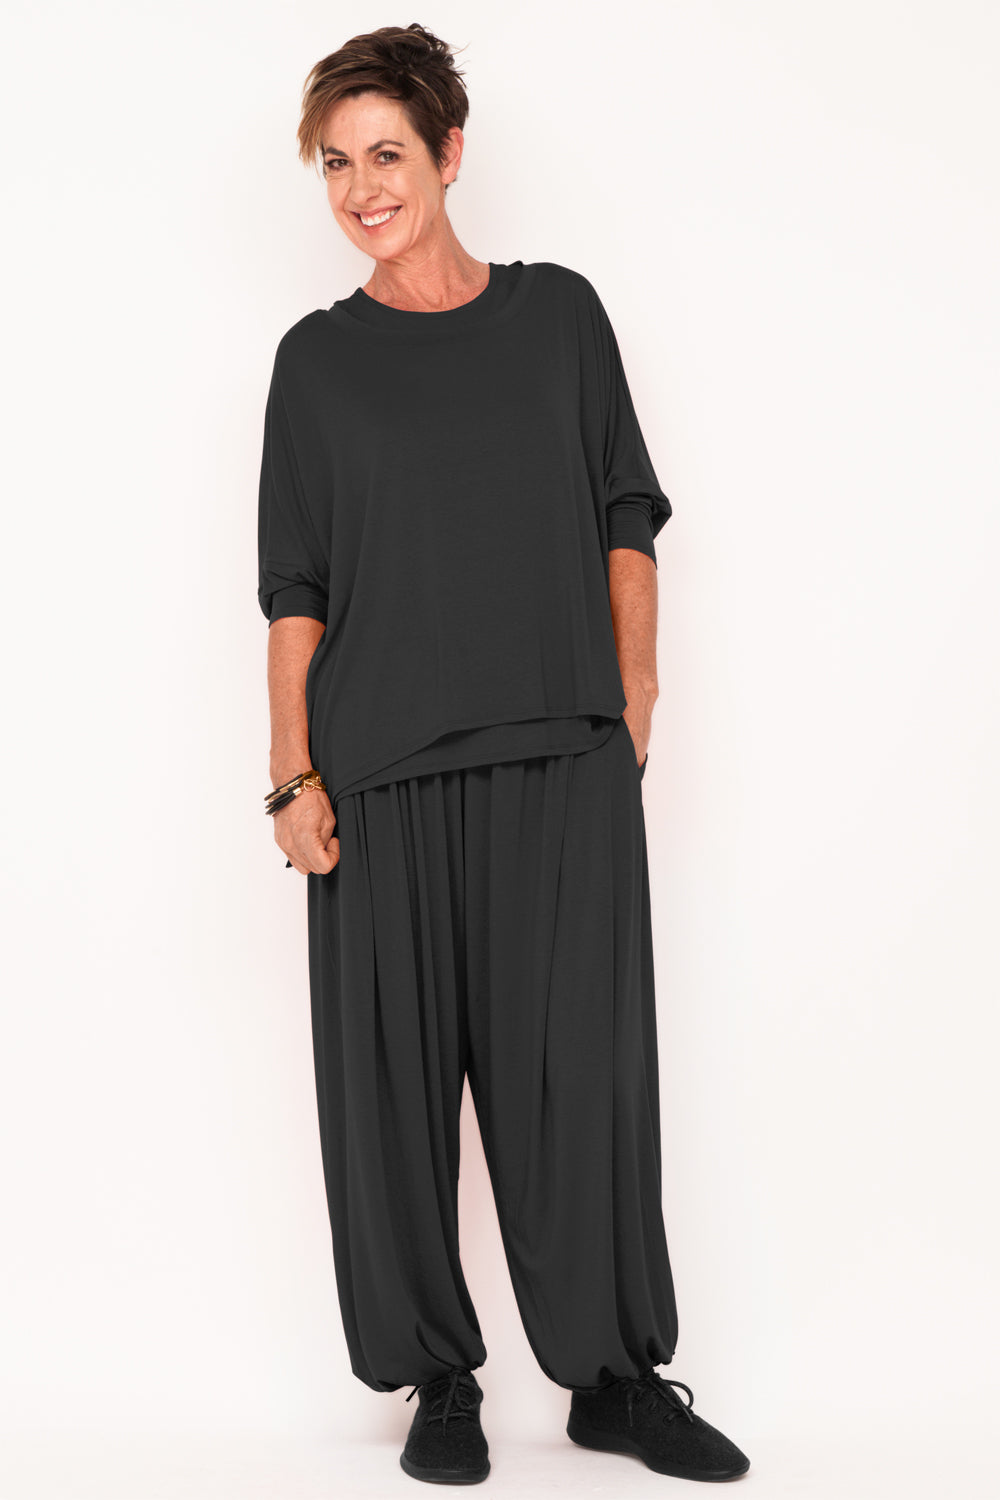 healthy-aging-fit-after-40-designer-womens-tracksuit-black-menopause